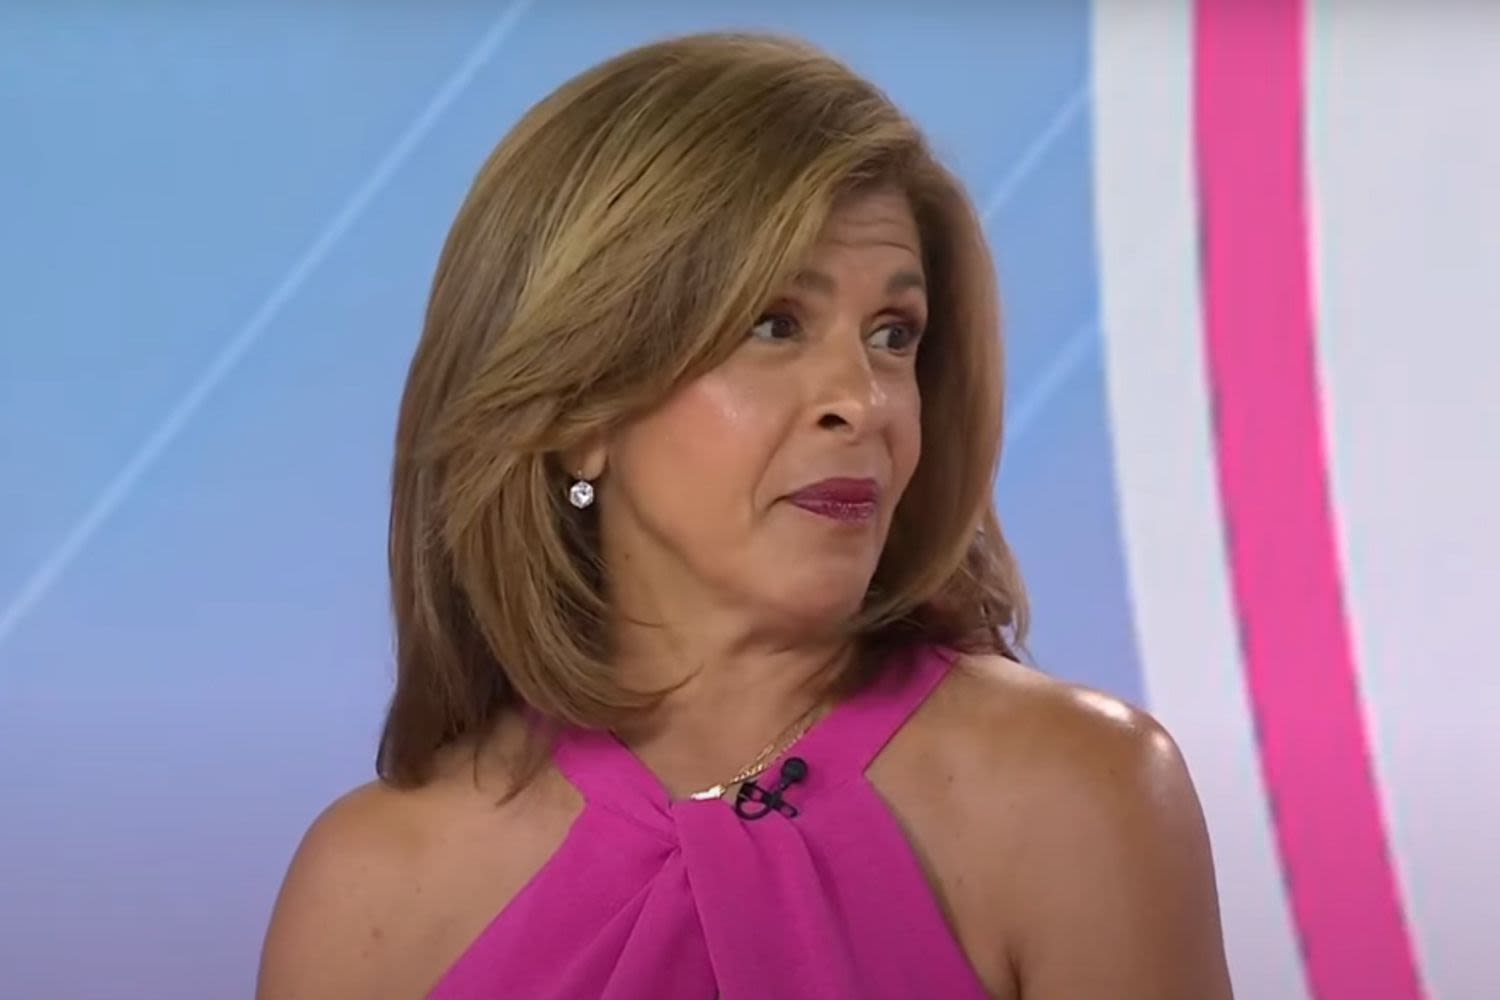 Hoda Kotb Jokes About Her Disappointment Over the “Law & Order: SVU” Role She Got